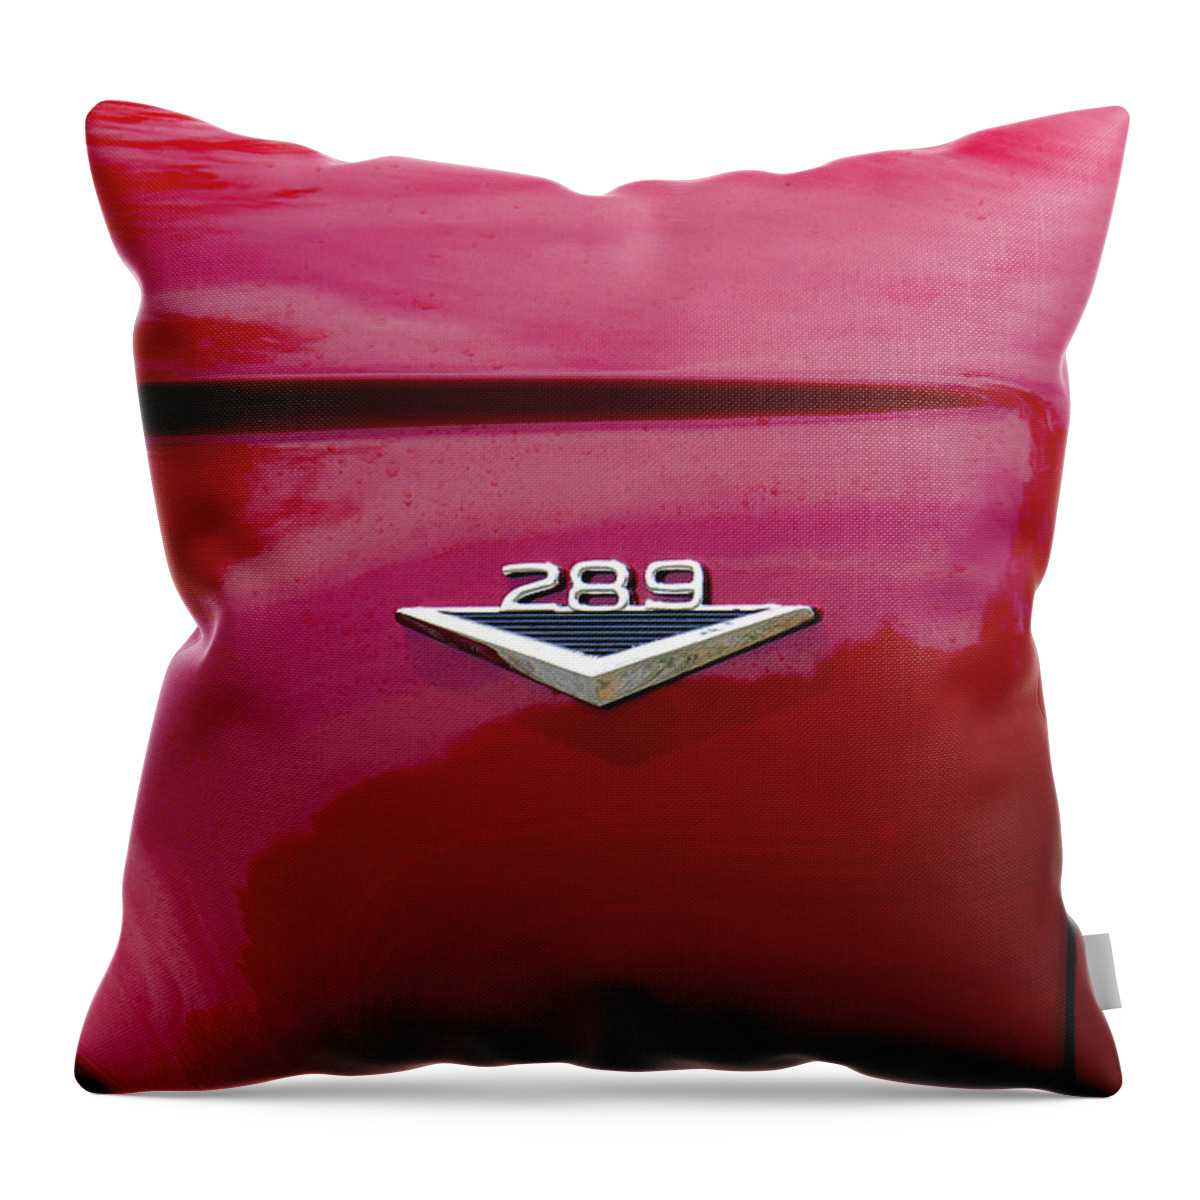 Richard Reeve Throw Pillow featuring the photograph Red Bronco 289 by Richard Reeve